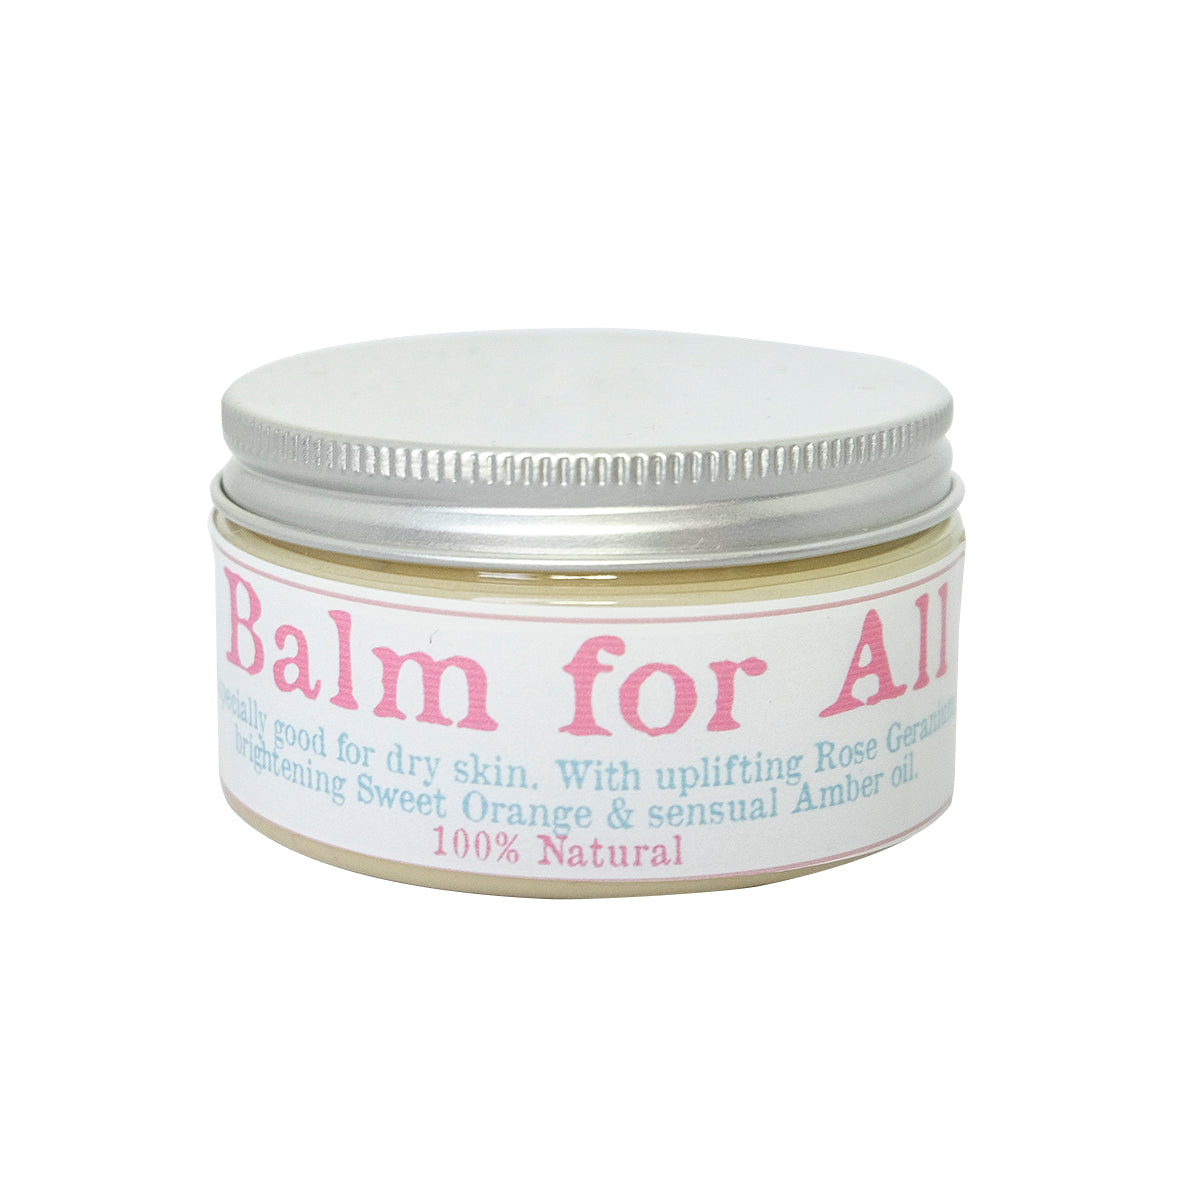 Balm for All  No 2